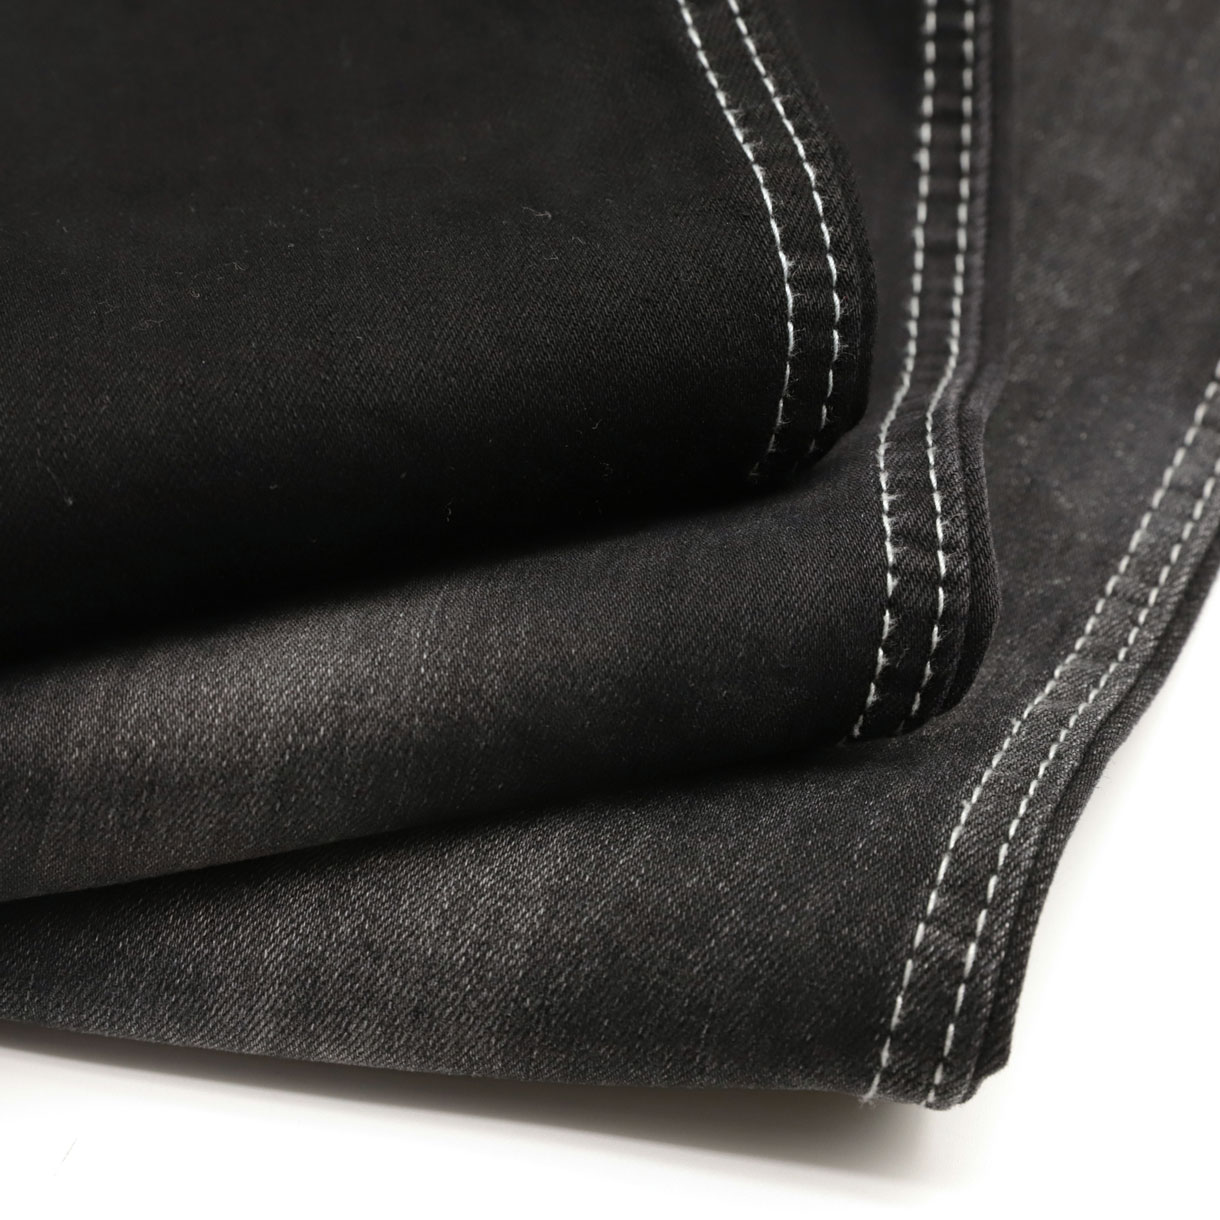 A Guide to Buy Premium Stretchable Denim Fabric 1